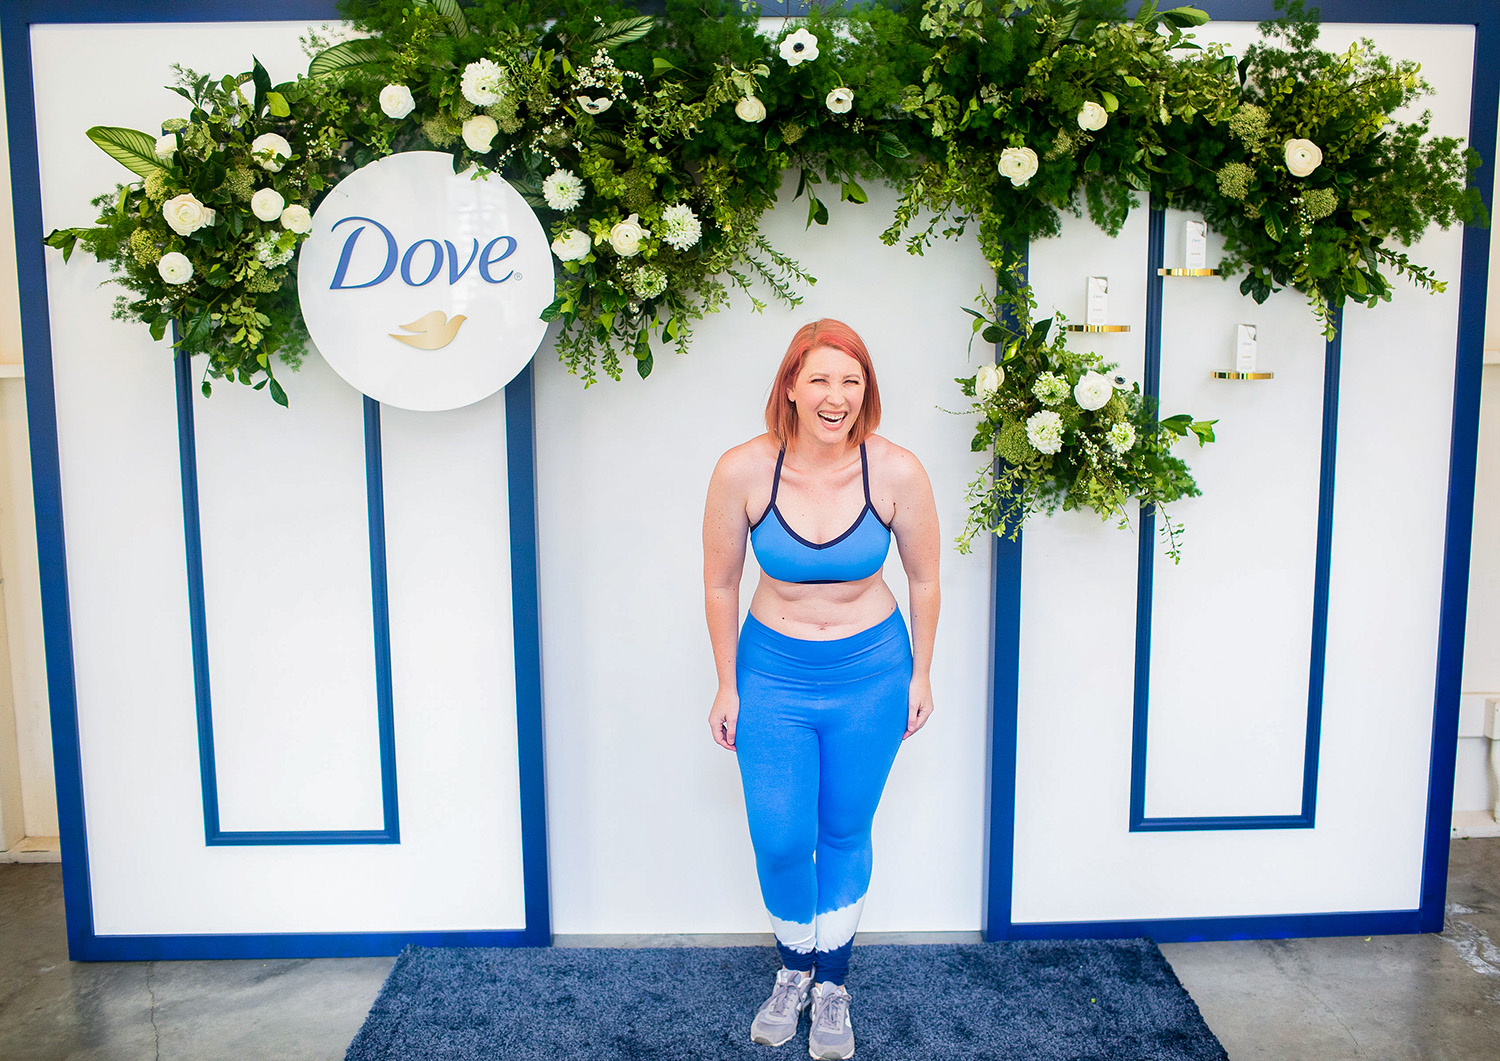 Behind the Scenes: The Dove Dry Serum Antiperspirant & Deodorant Yoga Event and what it taught me about my own body image.